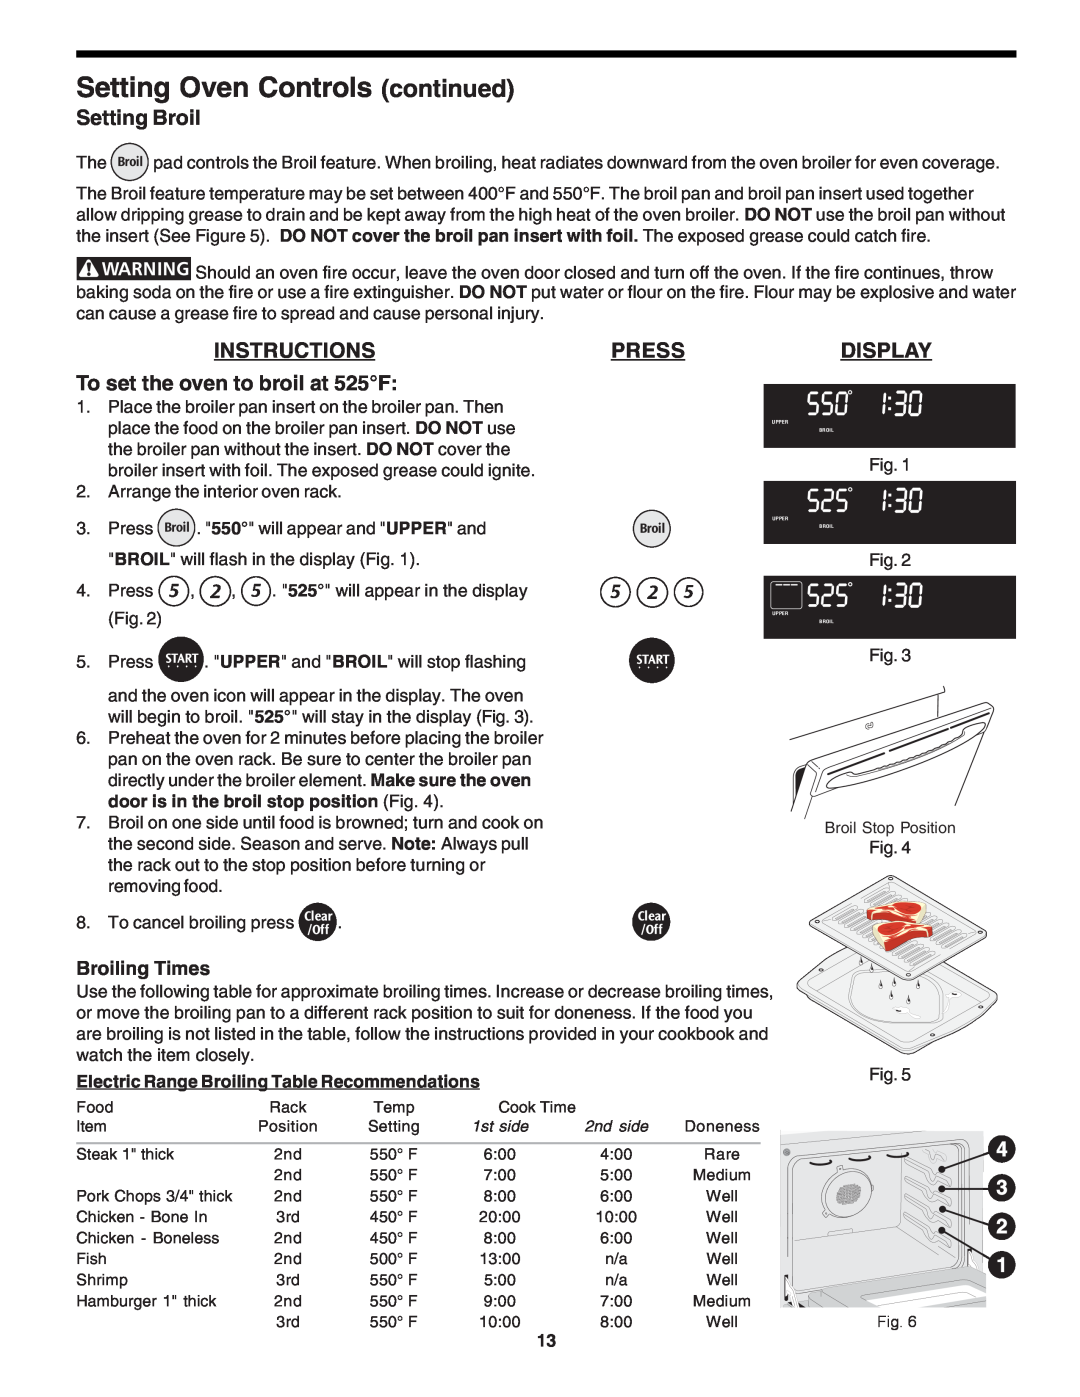 Frigidaire 318200138 (0610) Setting Broil, INSTRUCTIONS To set the oven to broil at 525F, Setting Oven Controls continued 